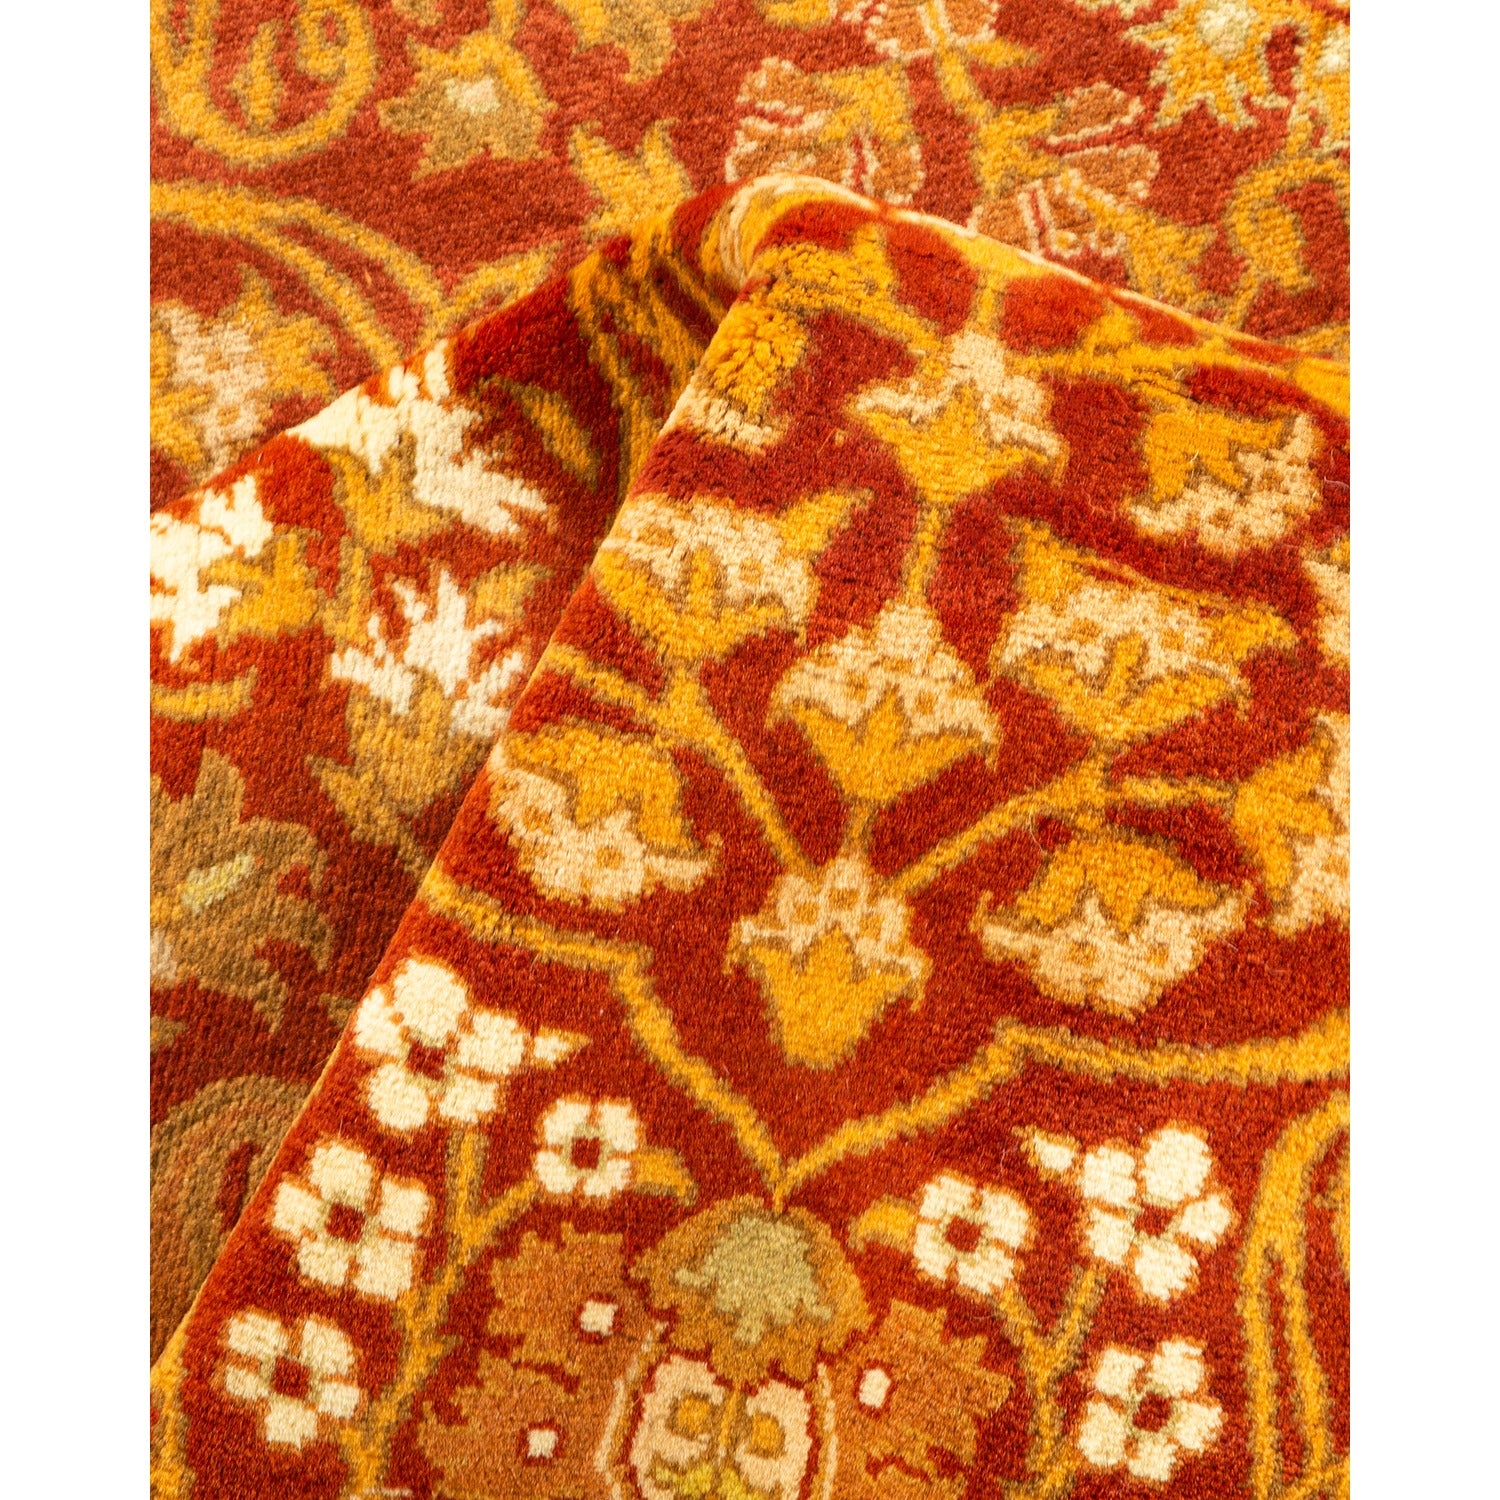 Detailed close-up of a richly patterned, plush oriental rug.